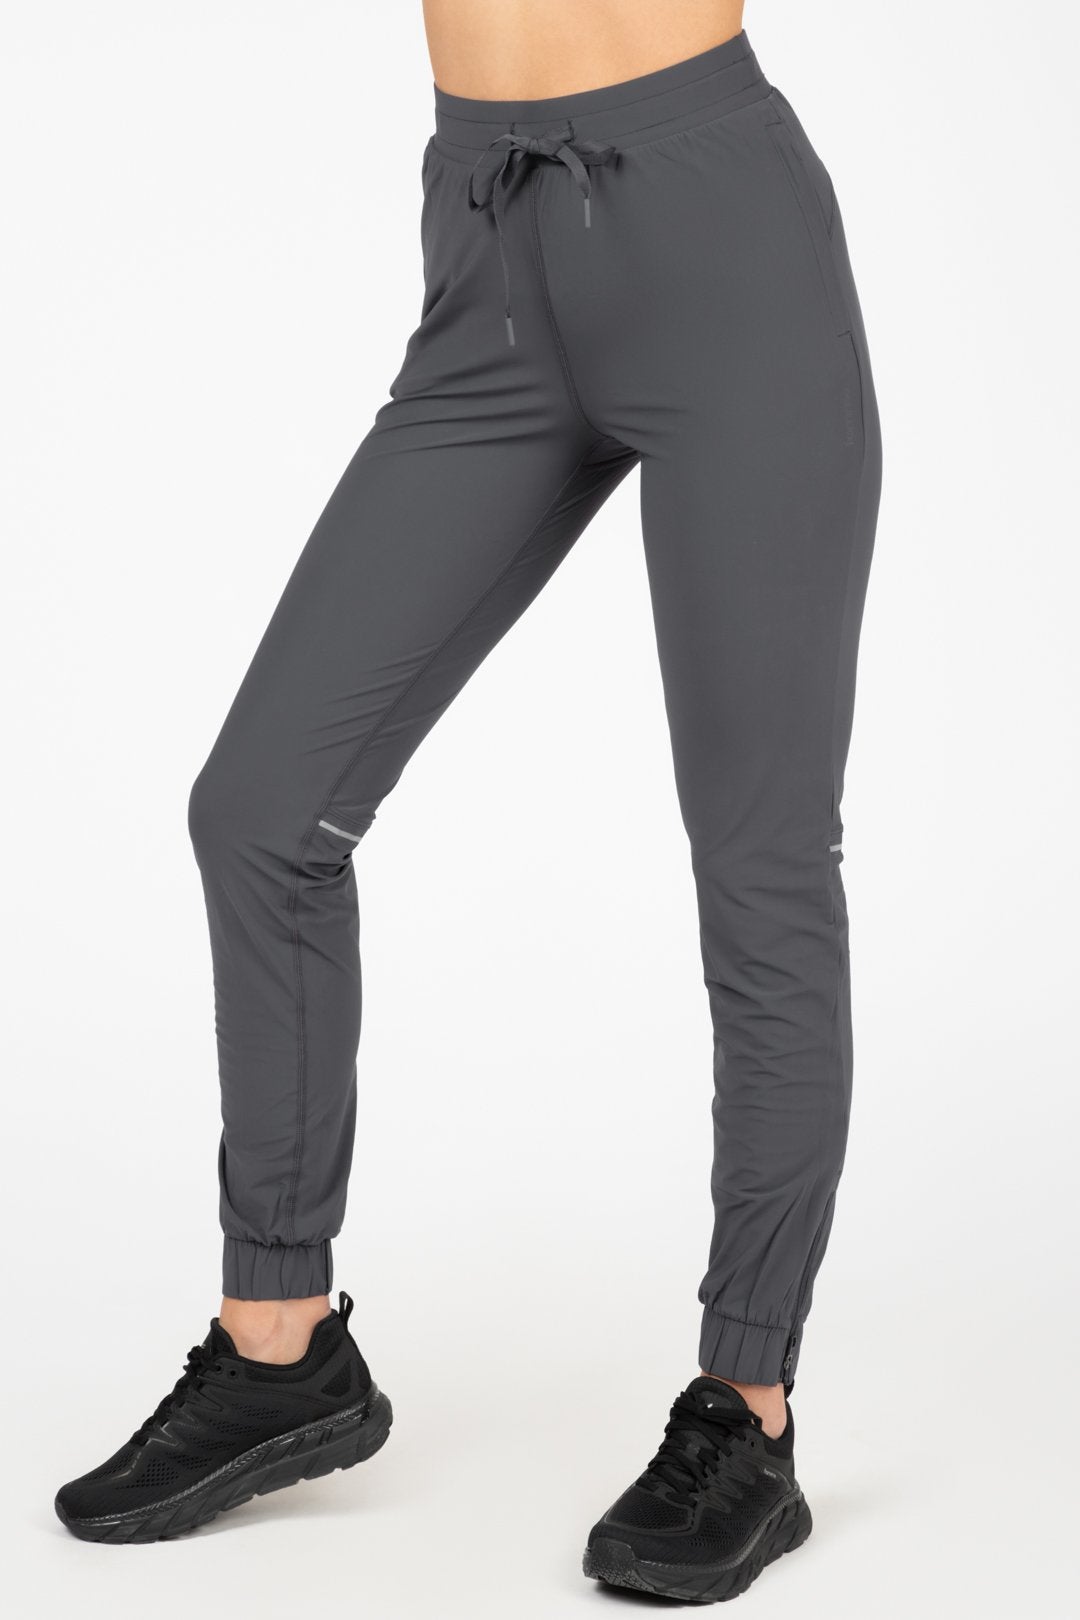 Grey Active Pants - for dame - Famme - Pants